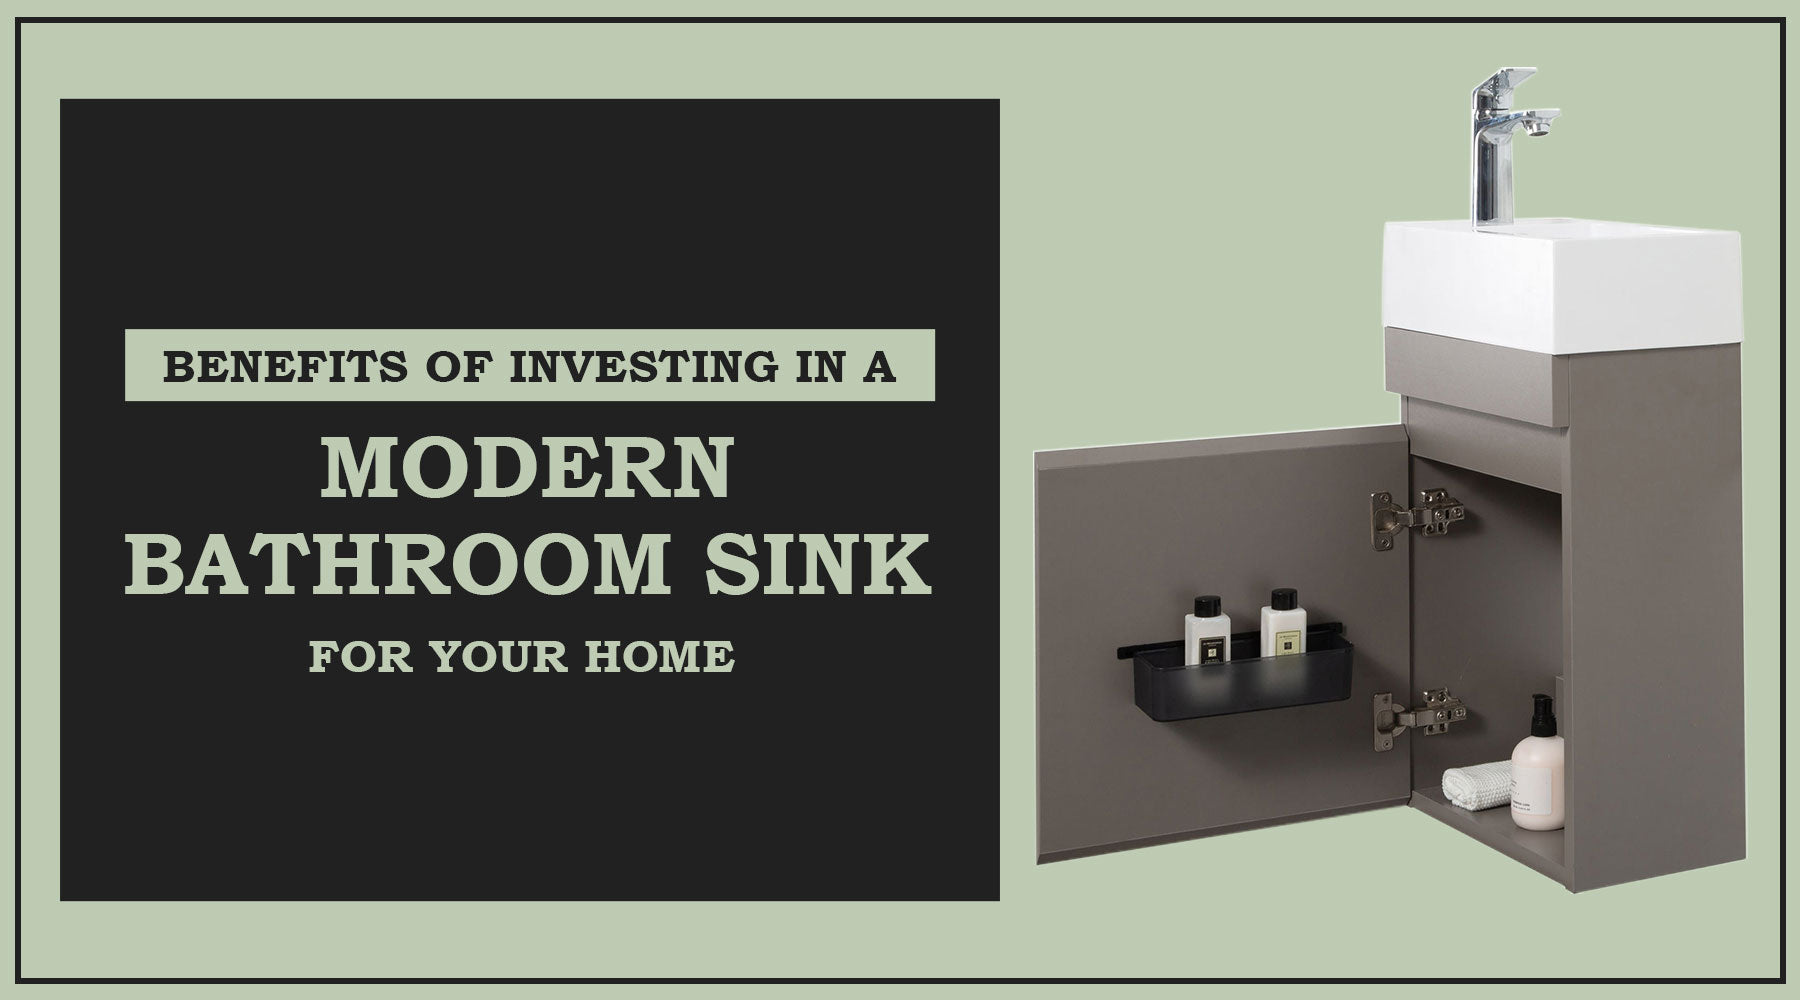 Benefits of Investing in a Modern Bathroom Sink for Your Home